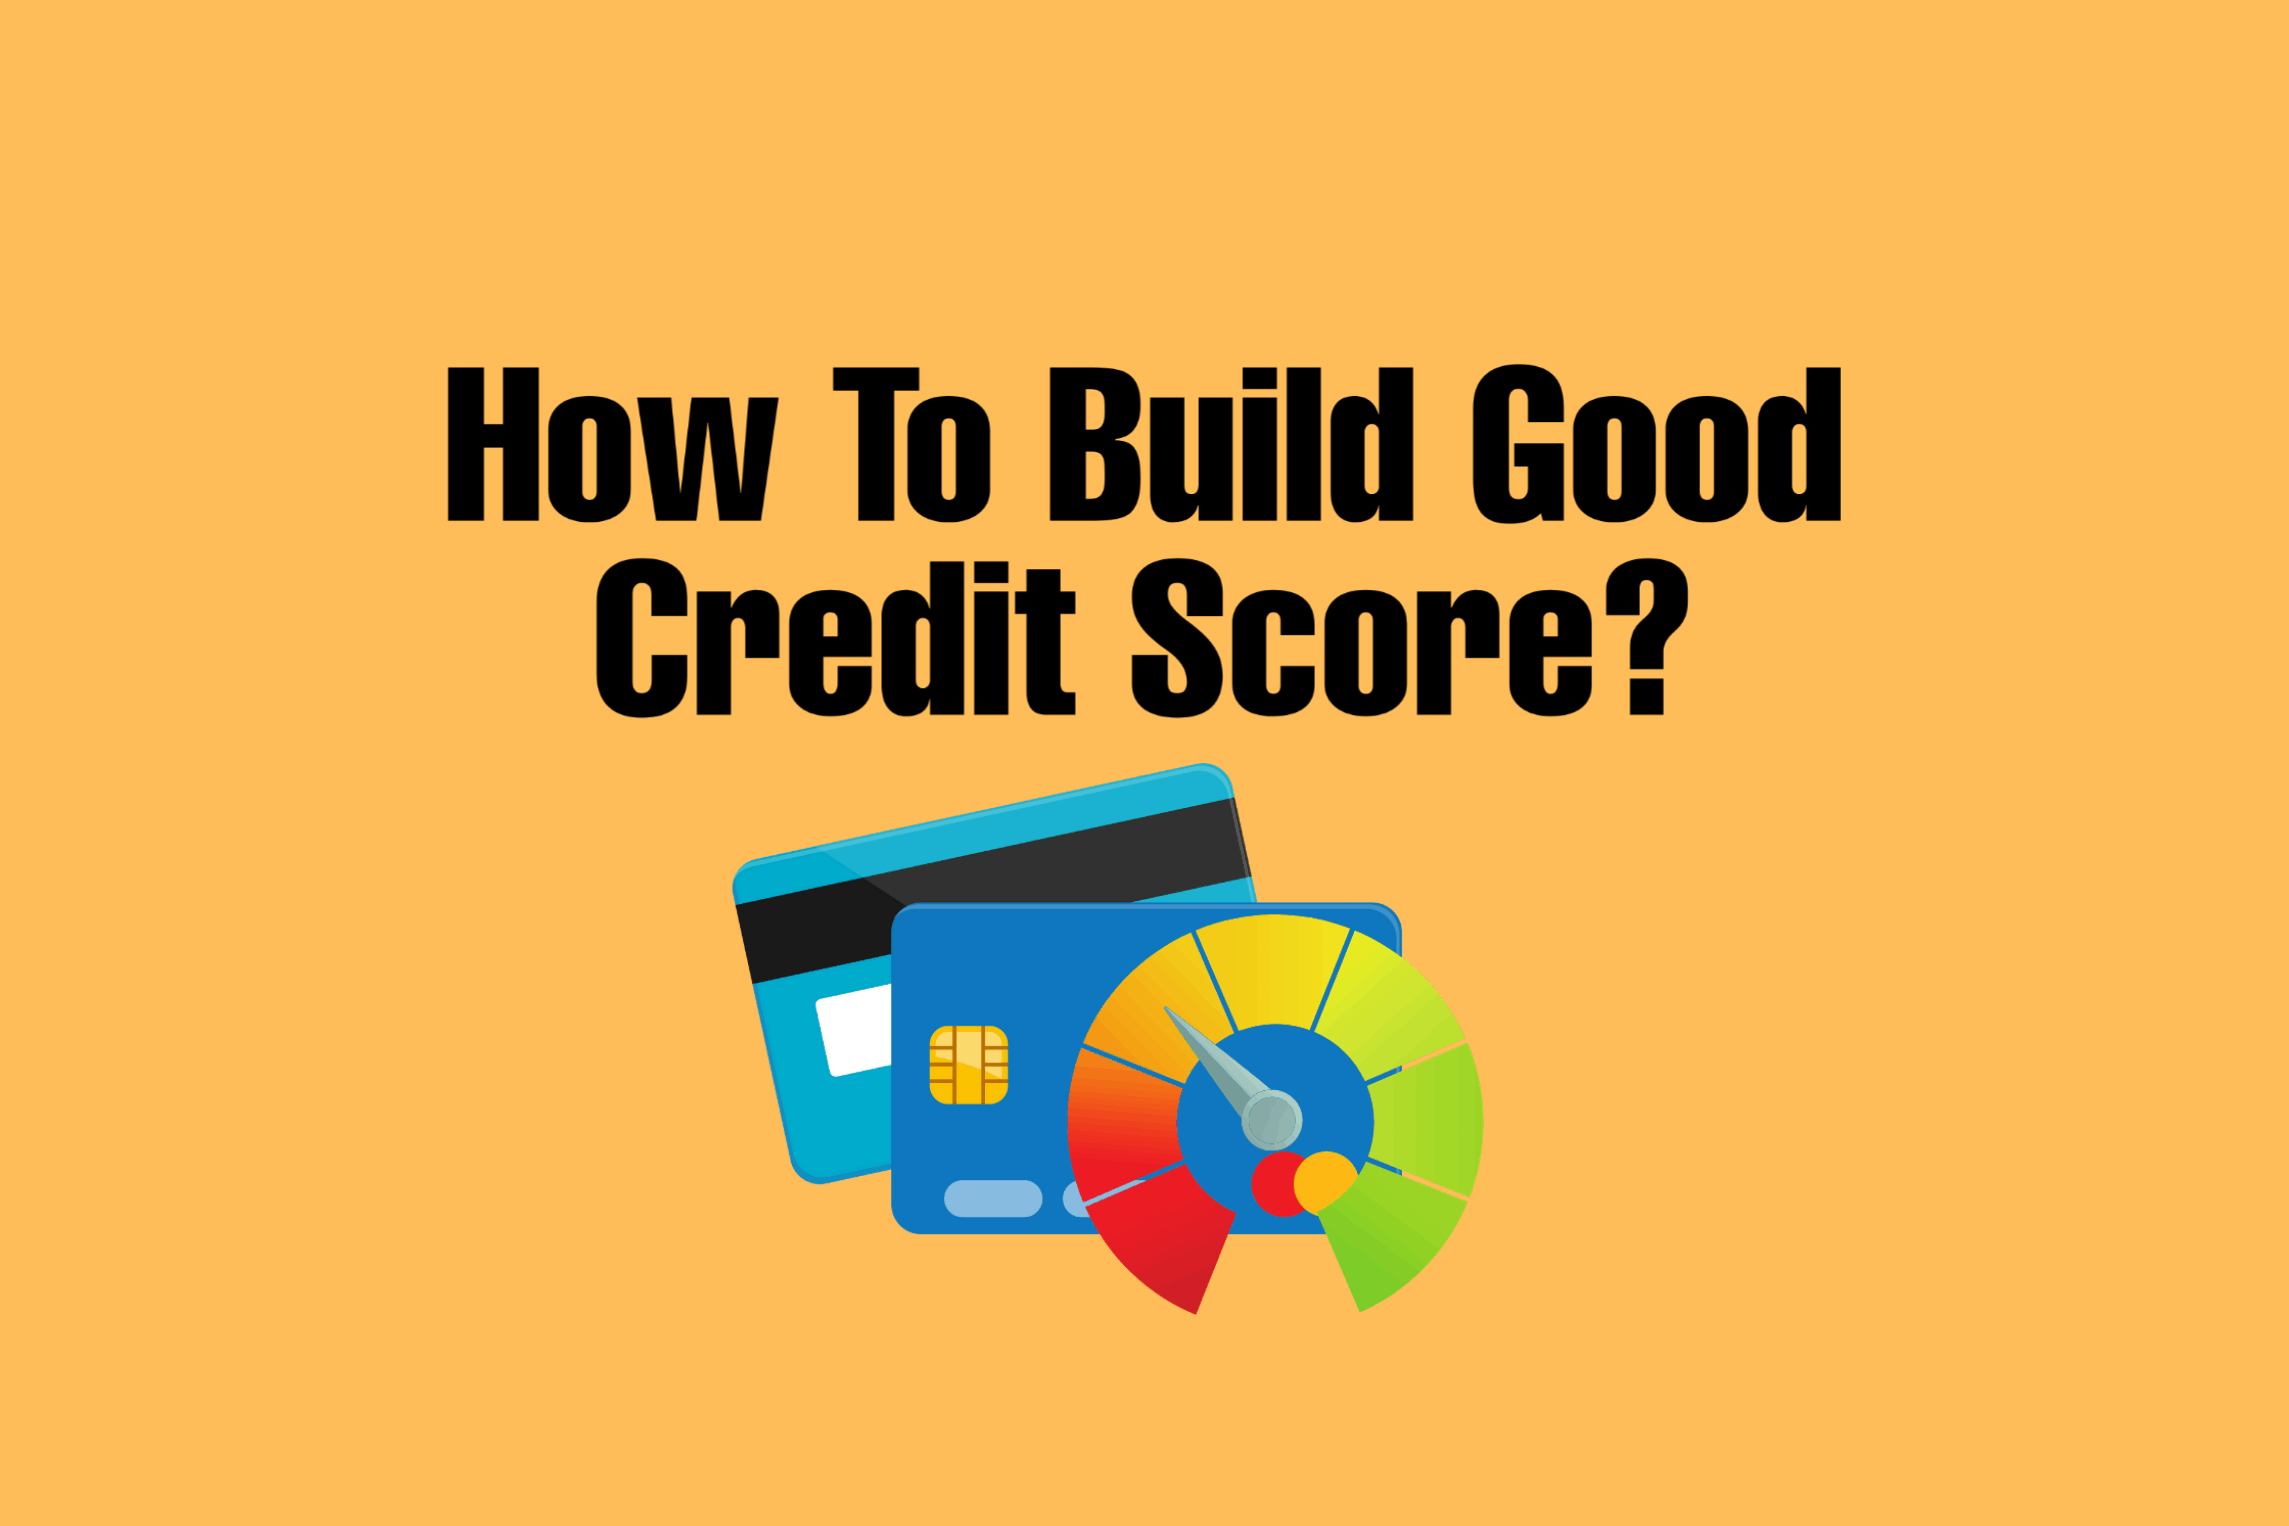 How Long It Take To Build A Excellent Credit Score In 2021?